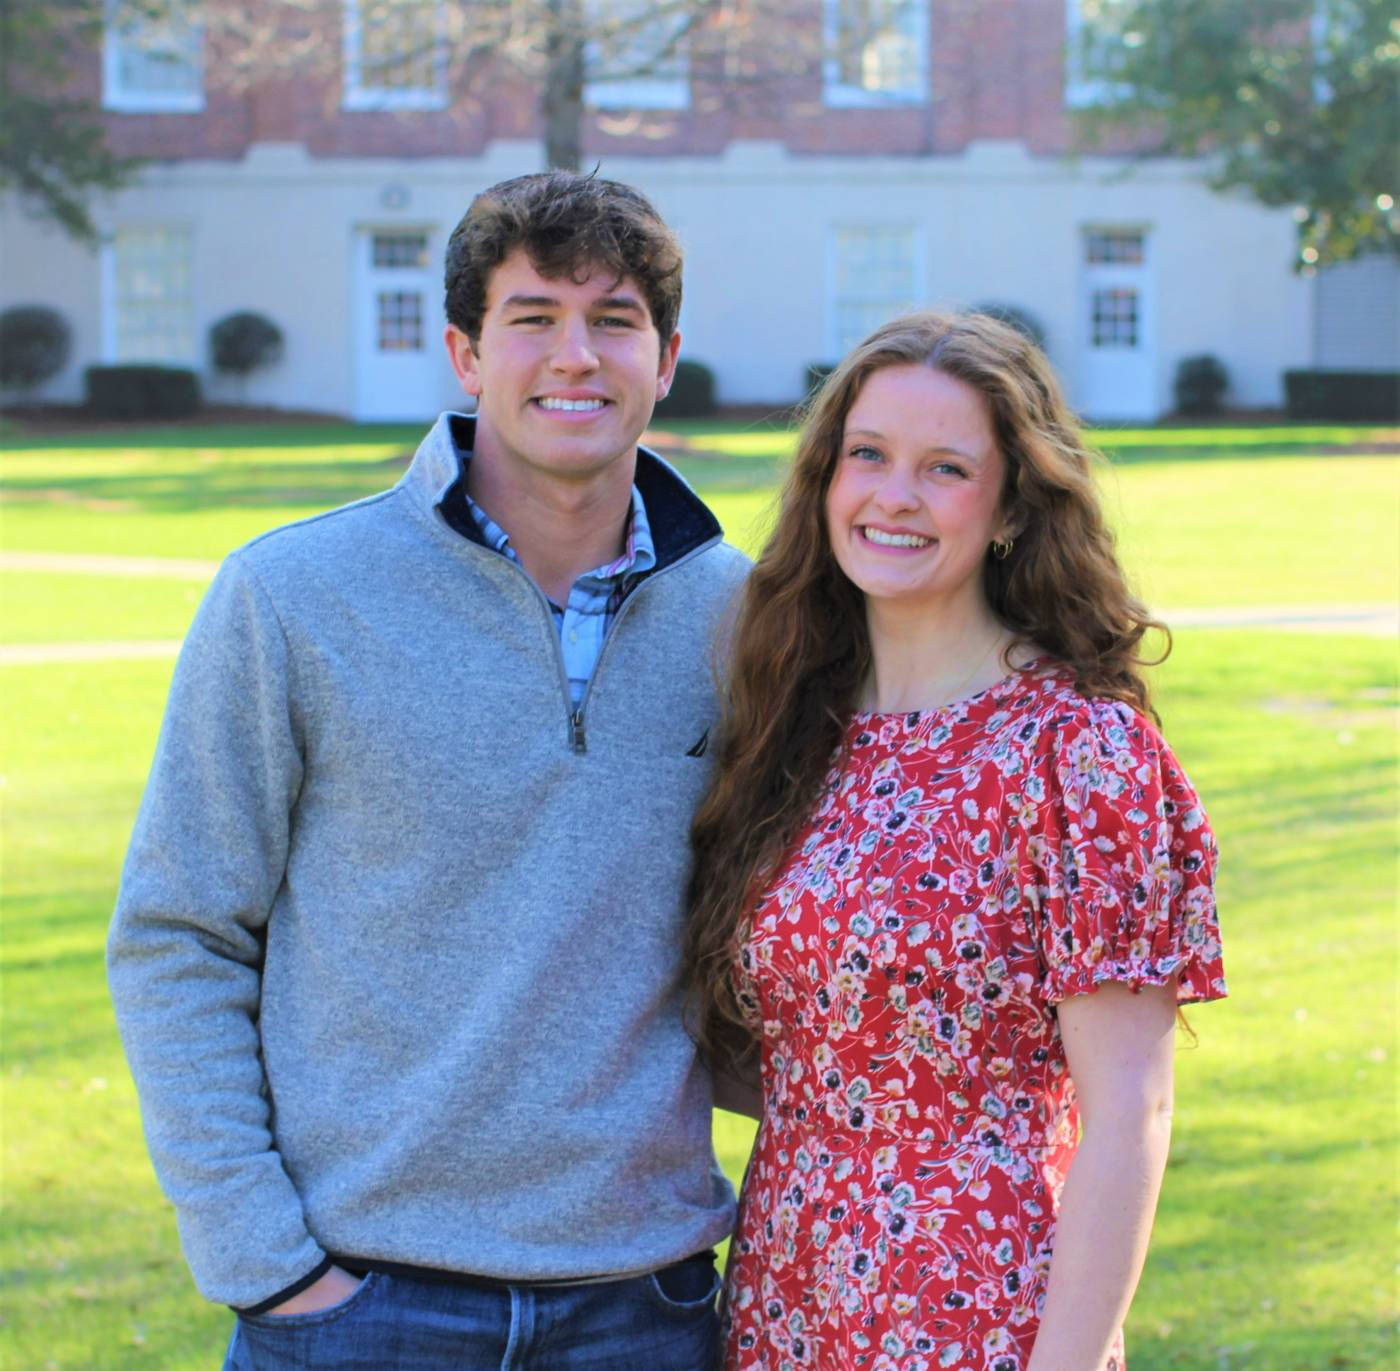 Jackson Breedlove and Carly Fisher told the Education Commission how God guided them to their collegiate home at Mississippi College.